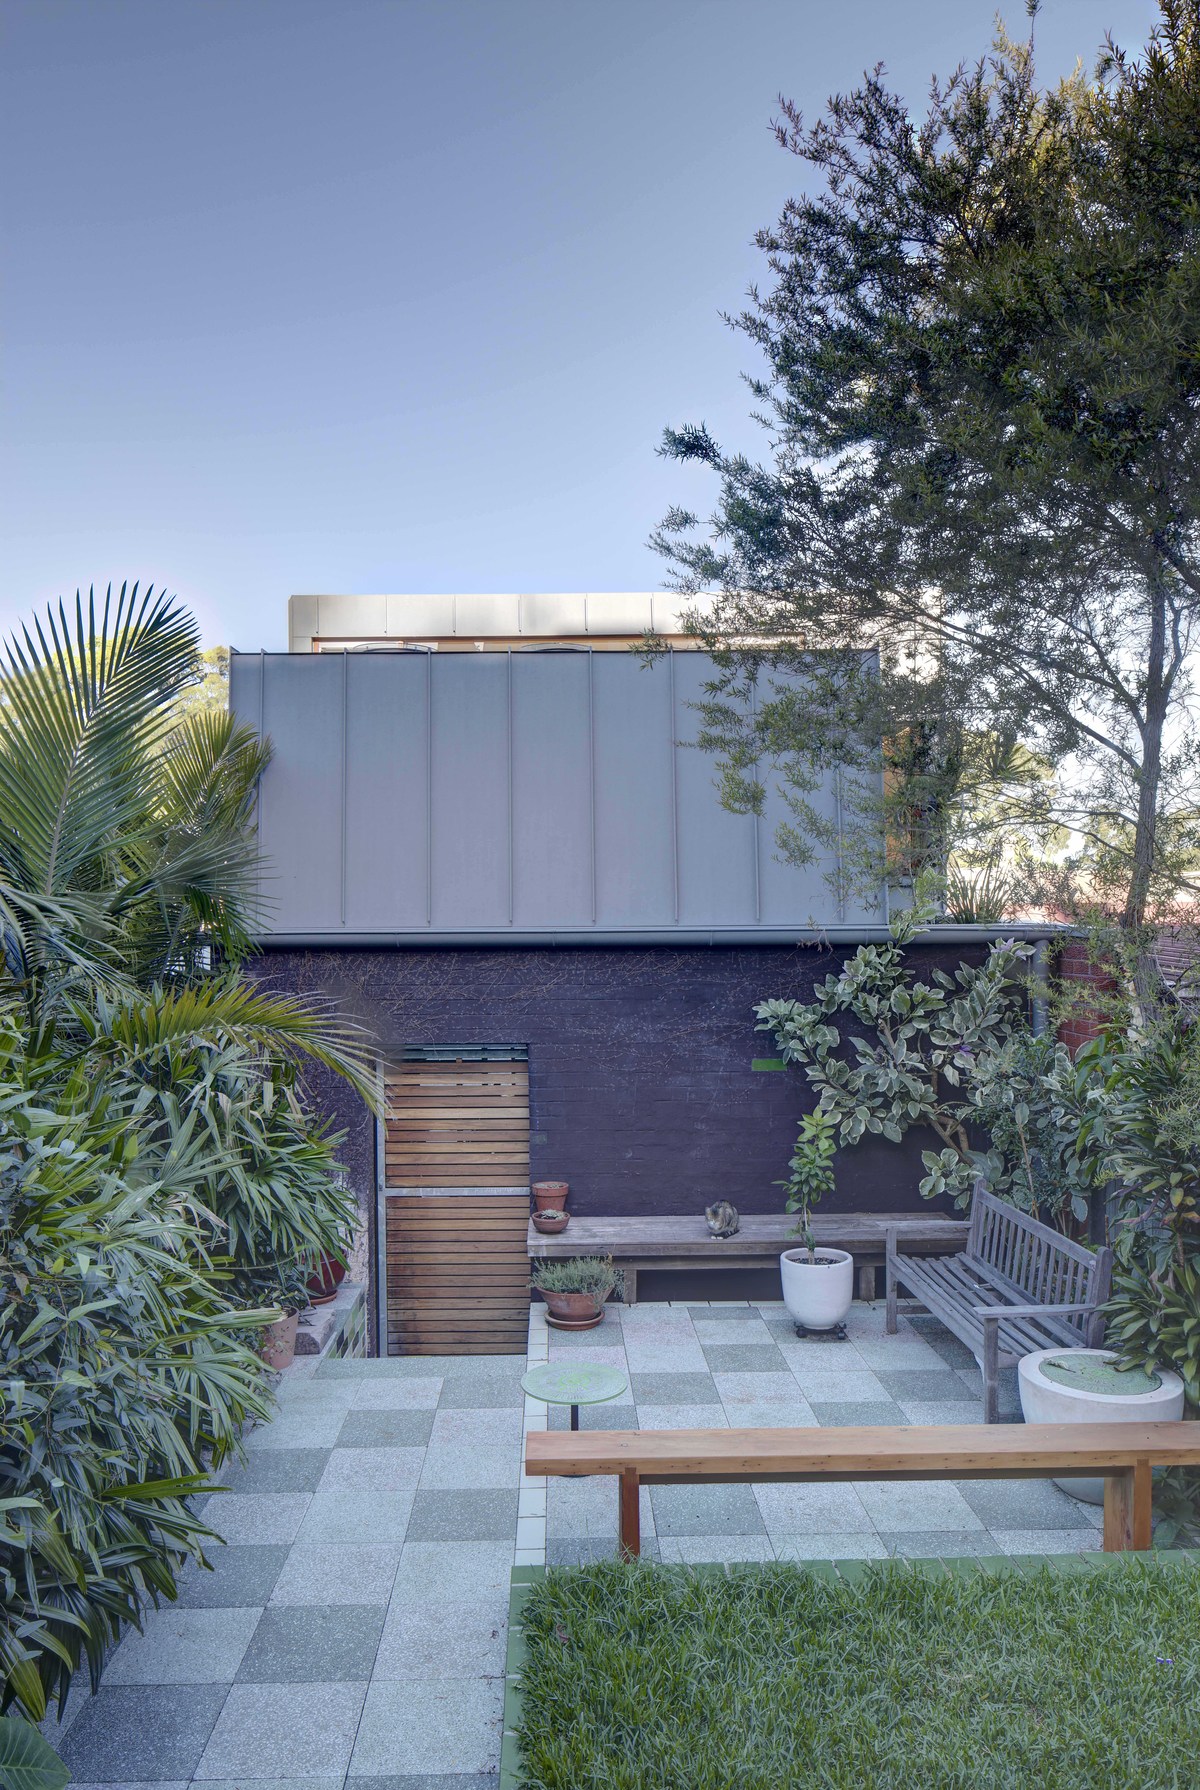 Courtyard view of the laneway house